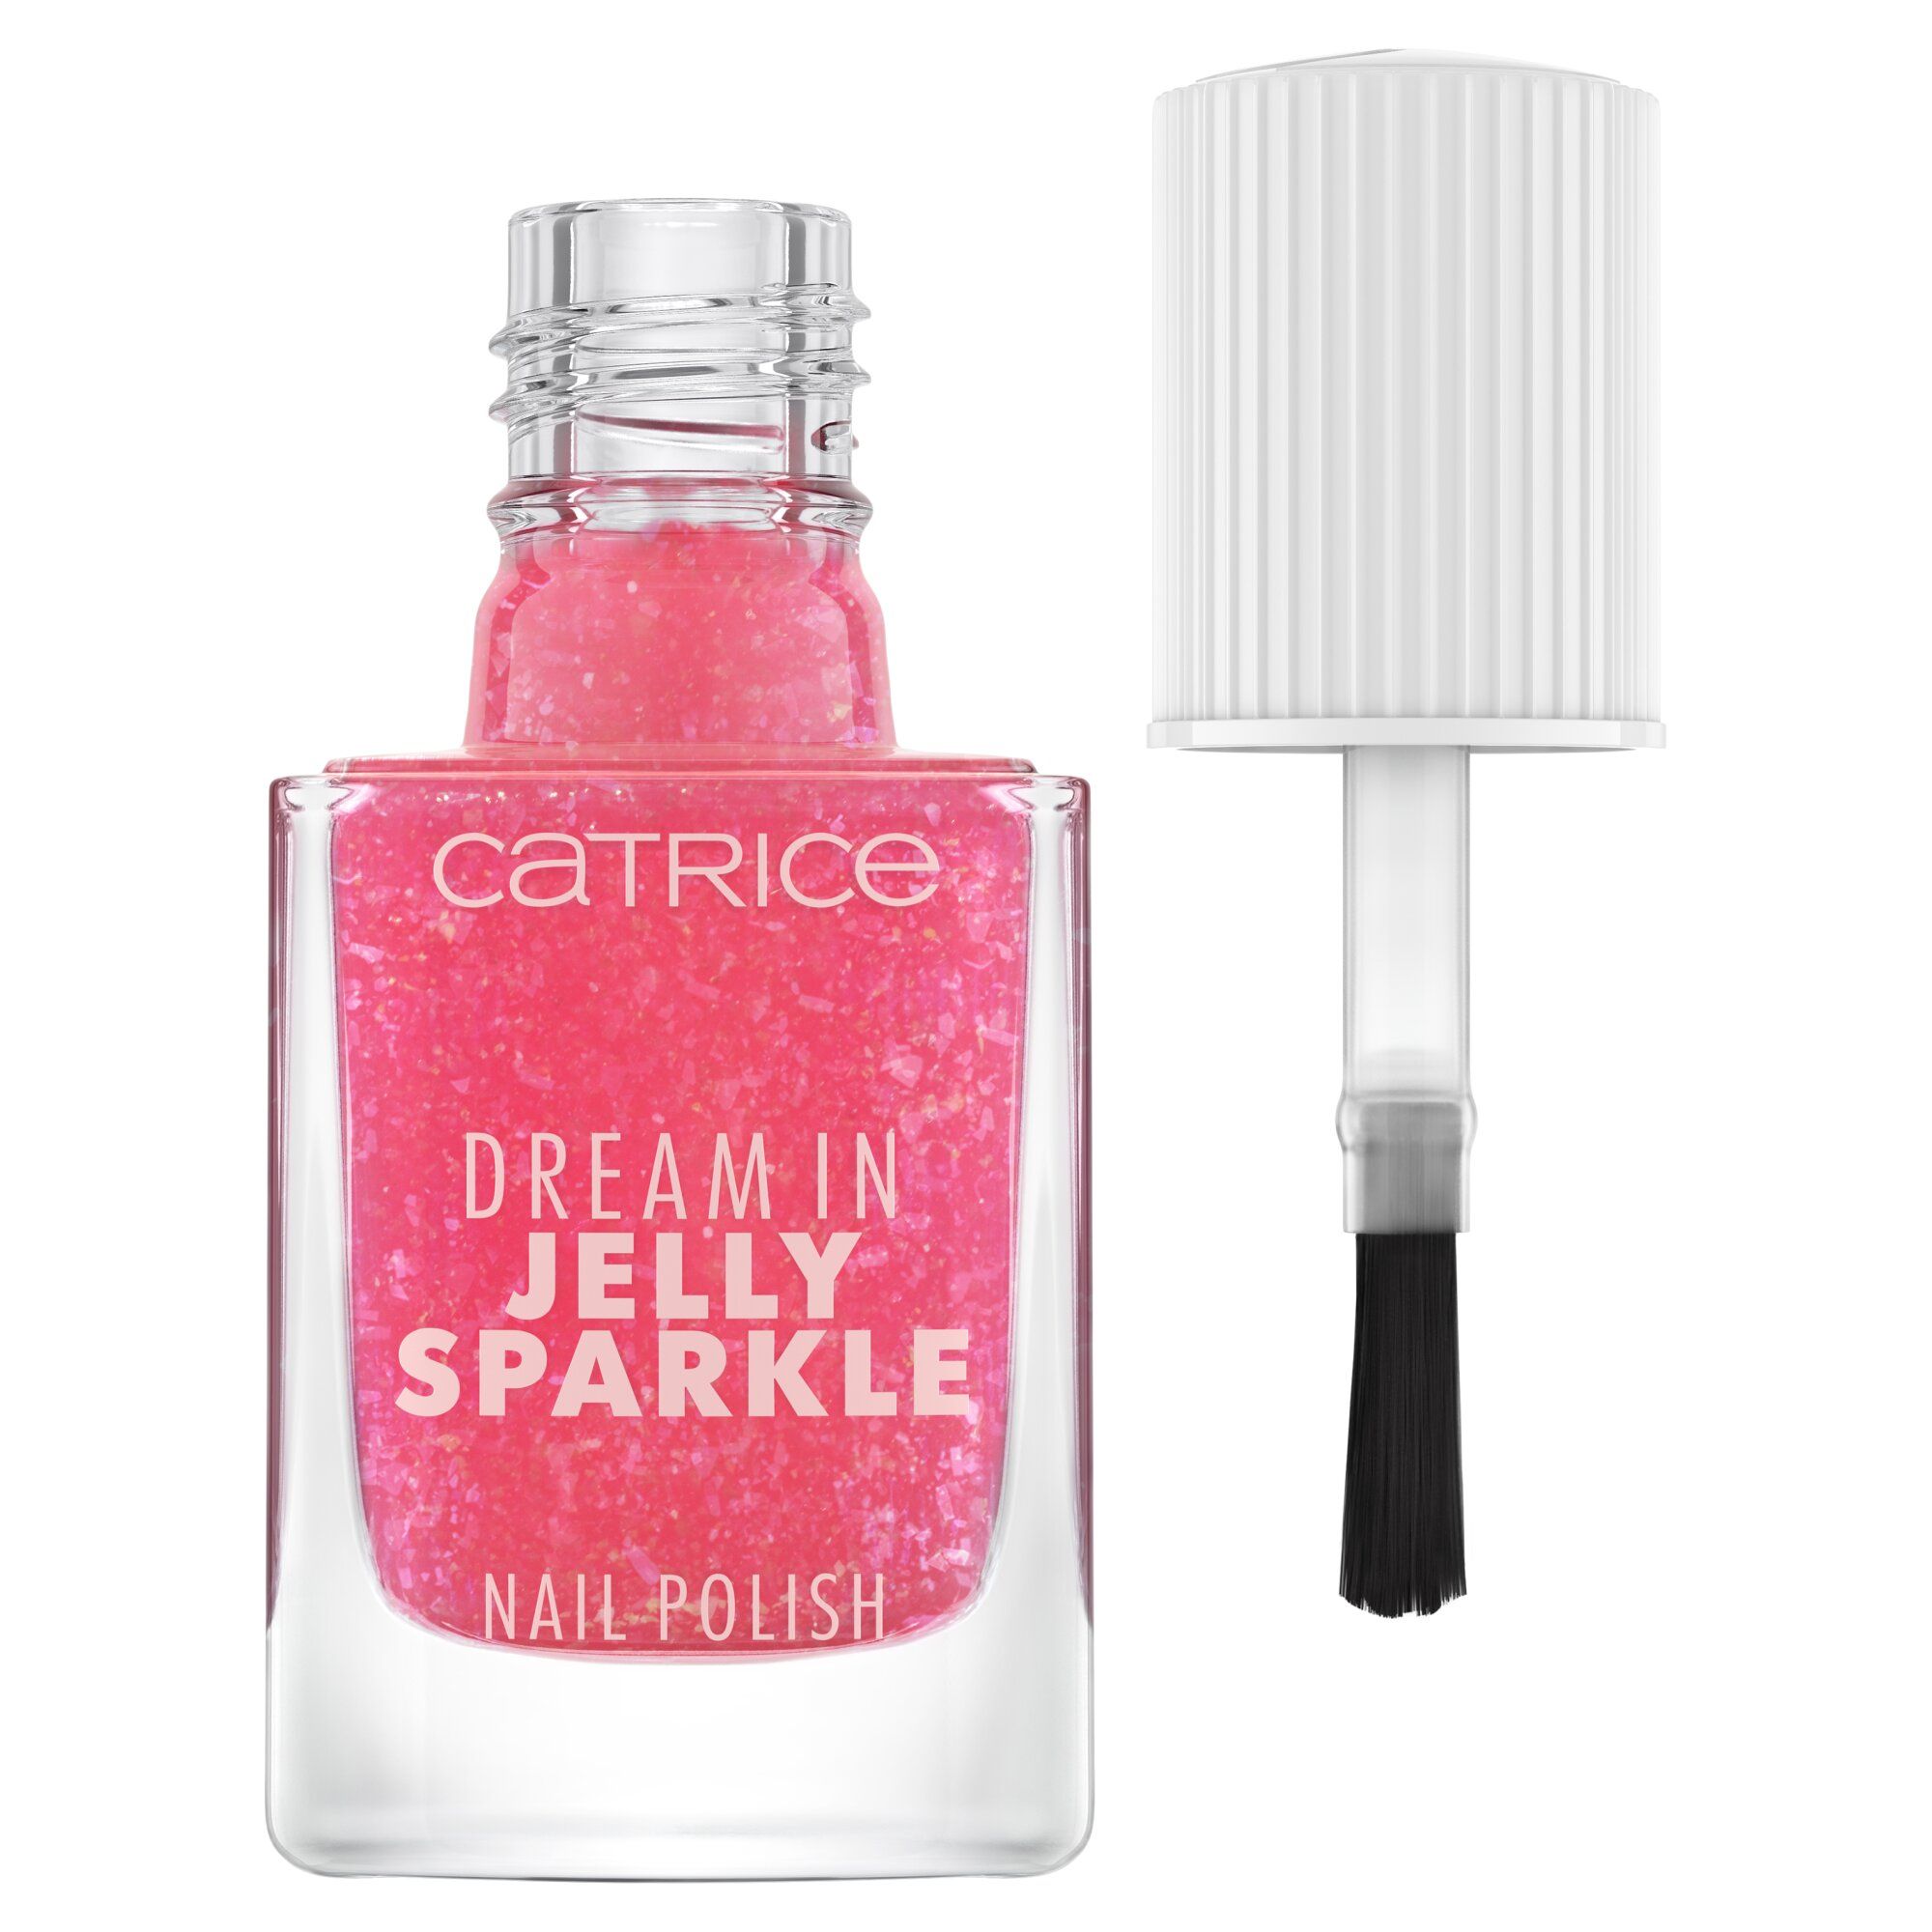 Vernis à Ongles - Dream In Jelly Sparkle Nail Polish